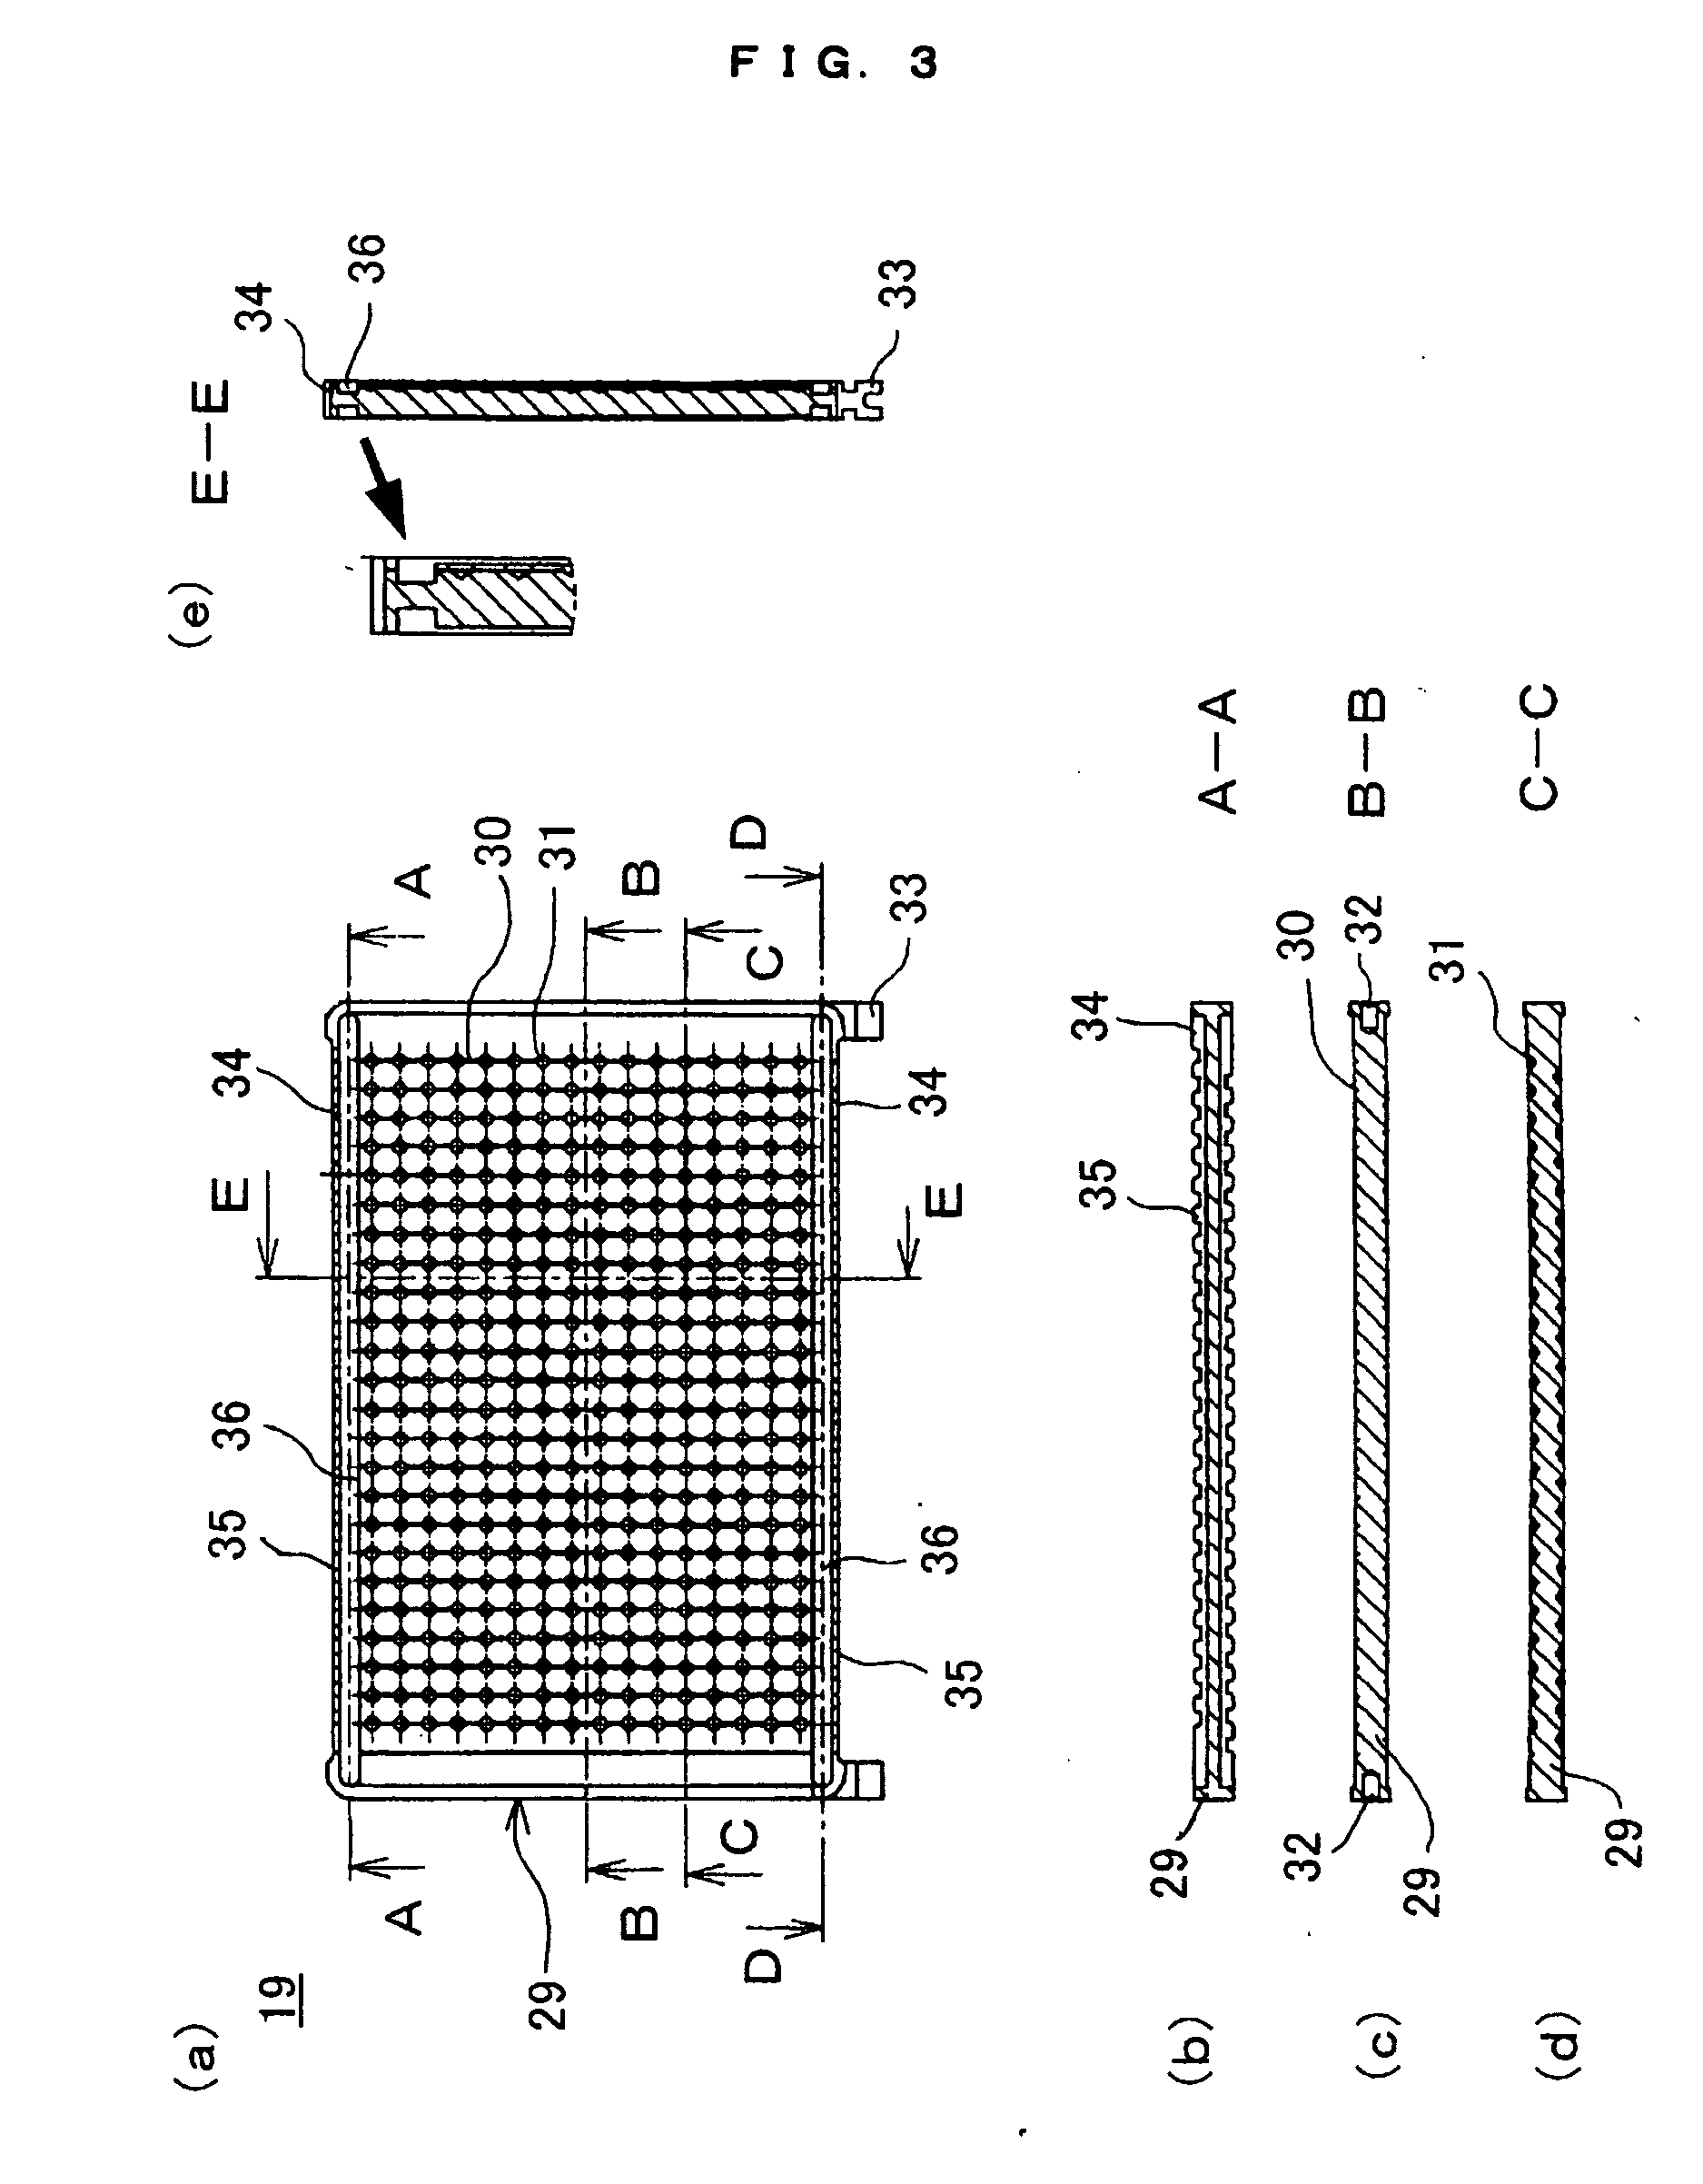 Sample arraying/assembling device, its method, and apparatus using sample assembly